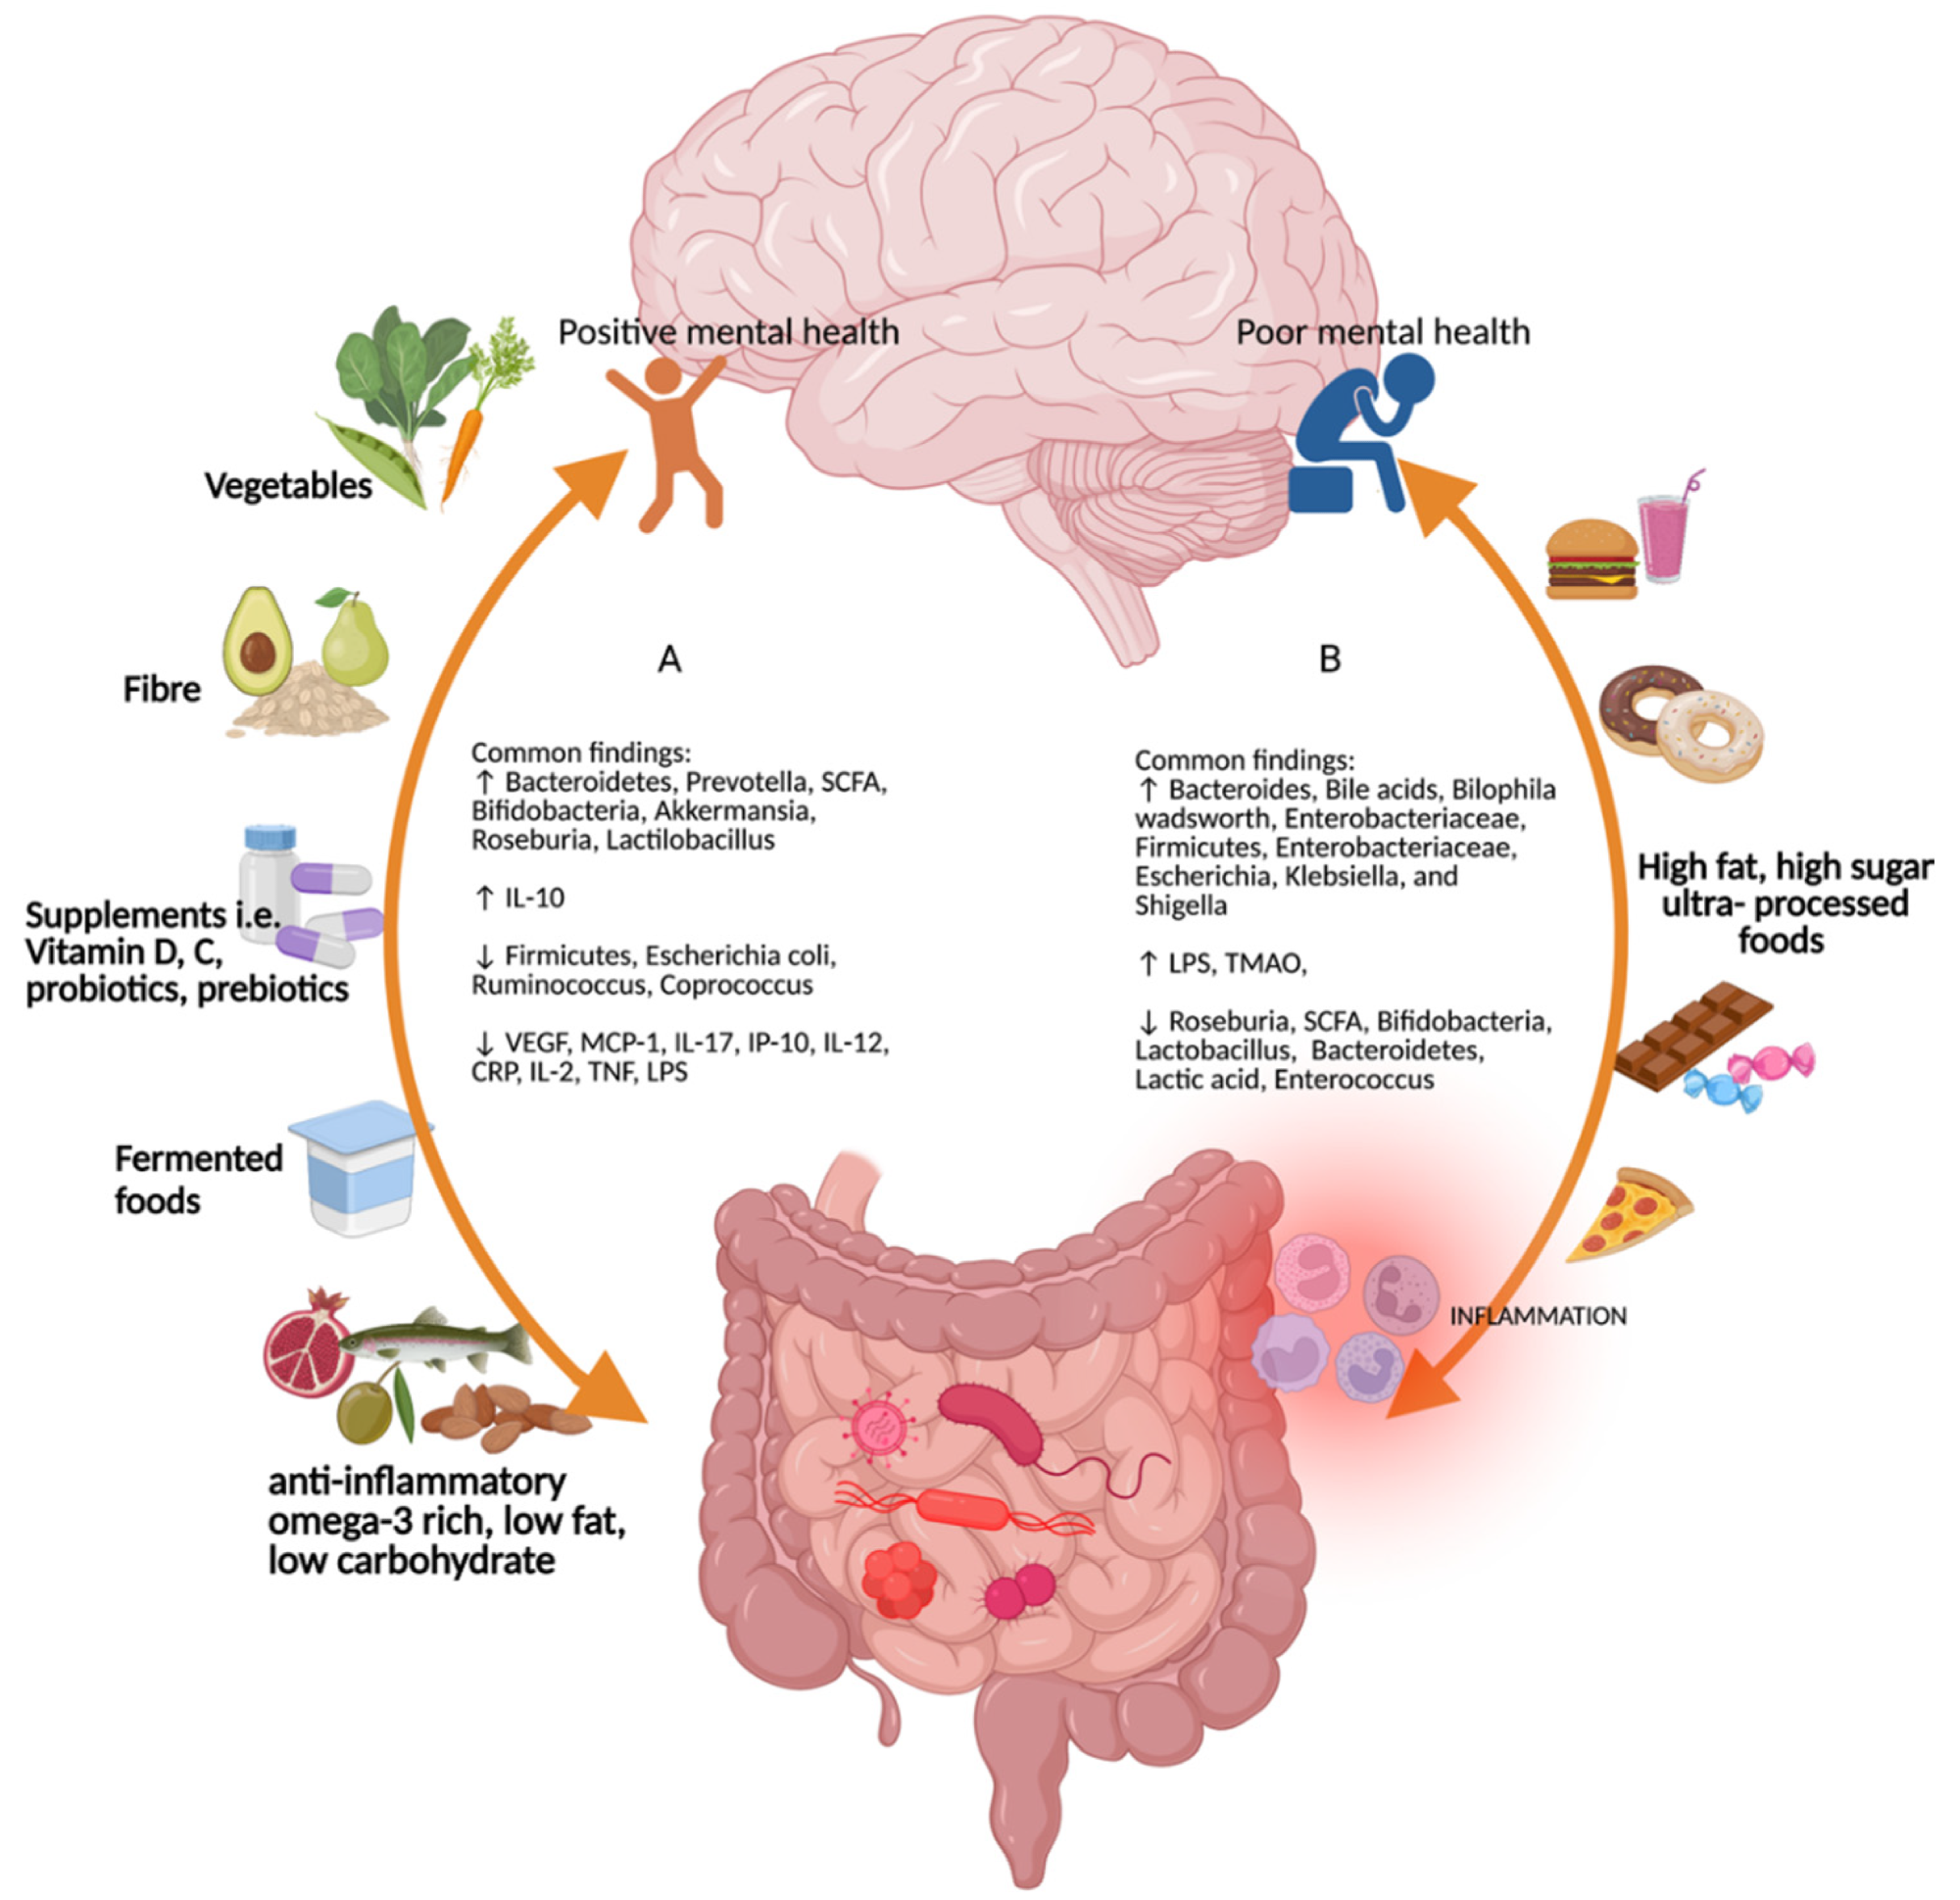 Common findings for different diet types on the gut-brain-microbiome axis.  (A) Diets rich in vegetables, fiber, micronutrients such as vitamins D and C, probiotics and prebiotics, fermented foods, omega-3-rich, low-fat, low-carbohydrate anti-inflammatory foods promote positive mental health and increase Bacteroidetes , Prevotella, short-chain fatty acids, Bifodobacteria, Akkermansia, Roseburia, Lactilobacillus, and interleukin (IL)-10, and decreases in Firmicutes, Escherichia coli, Ruminococcus, Coprococcus, vascular endothelial growth factor, monocyte chemoattractant protein 1, interferon gamma-induced protein 10, IL-17, IL-12, c-reactive protein, IL-2, tumor necrosis factor, and lipopolysaccharide.  (B) High-fat, high-sugar, and ultra-processed foods increase Bacteroides, bile acids, Bilophila wadsworth, Enterobacteriaceae, Firmicutes, Enterobacteriaceae, Escherichia, Klebsiella, and Shigella.  Figure created with Biorender (accessed April 29, 2022).